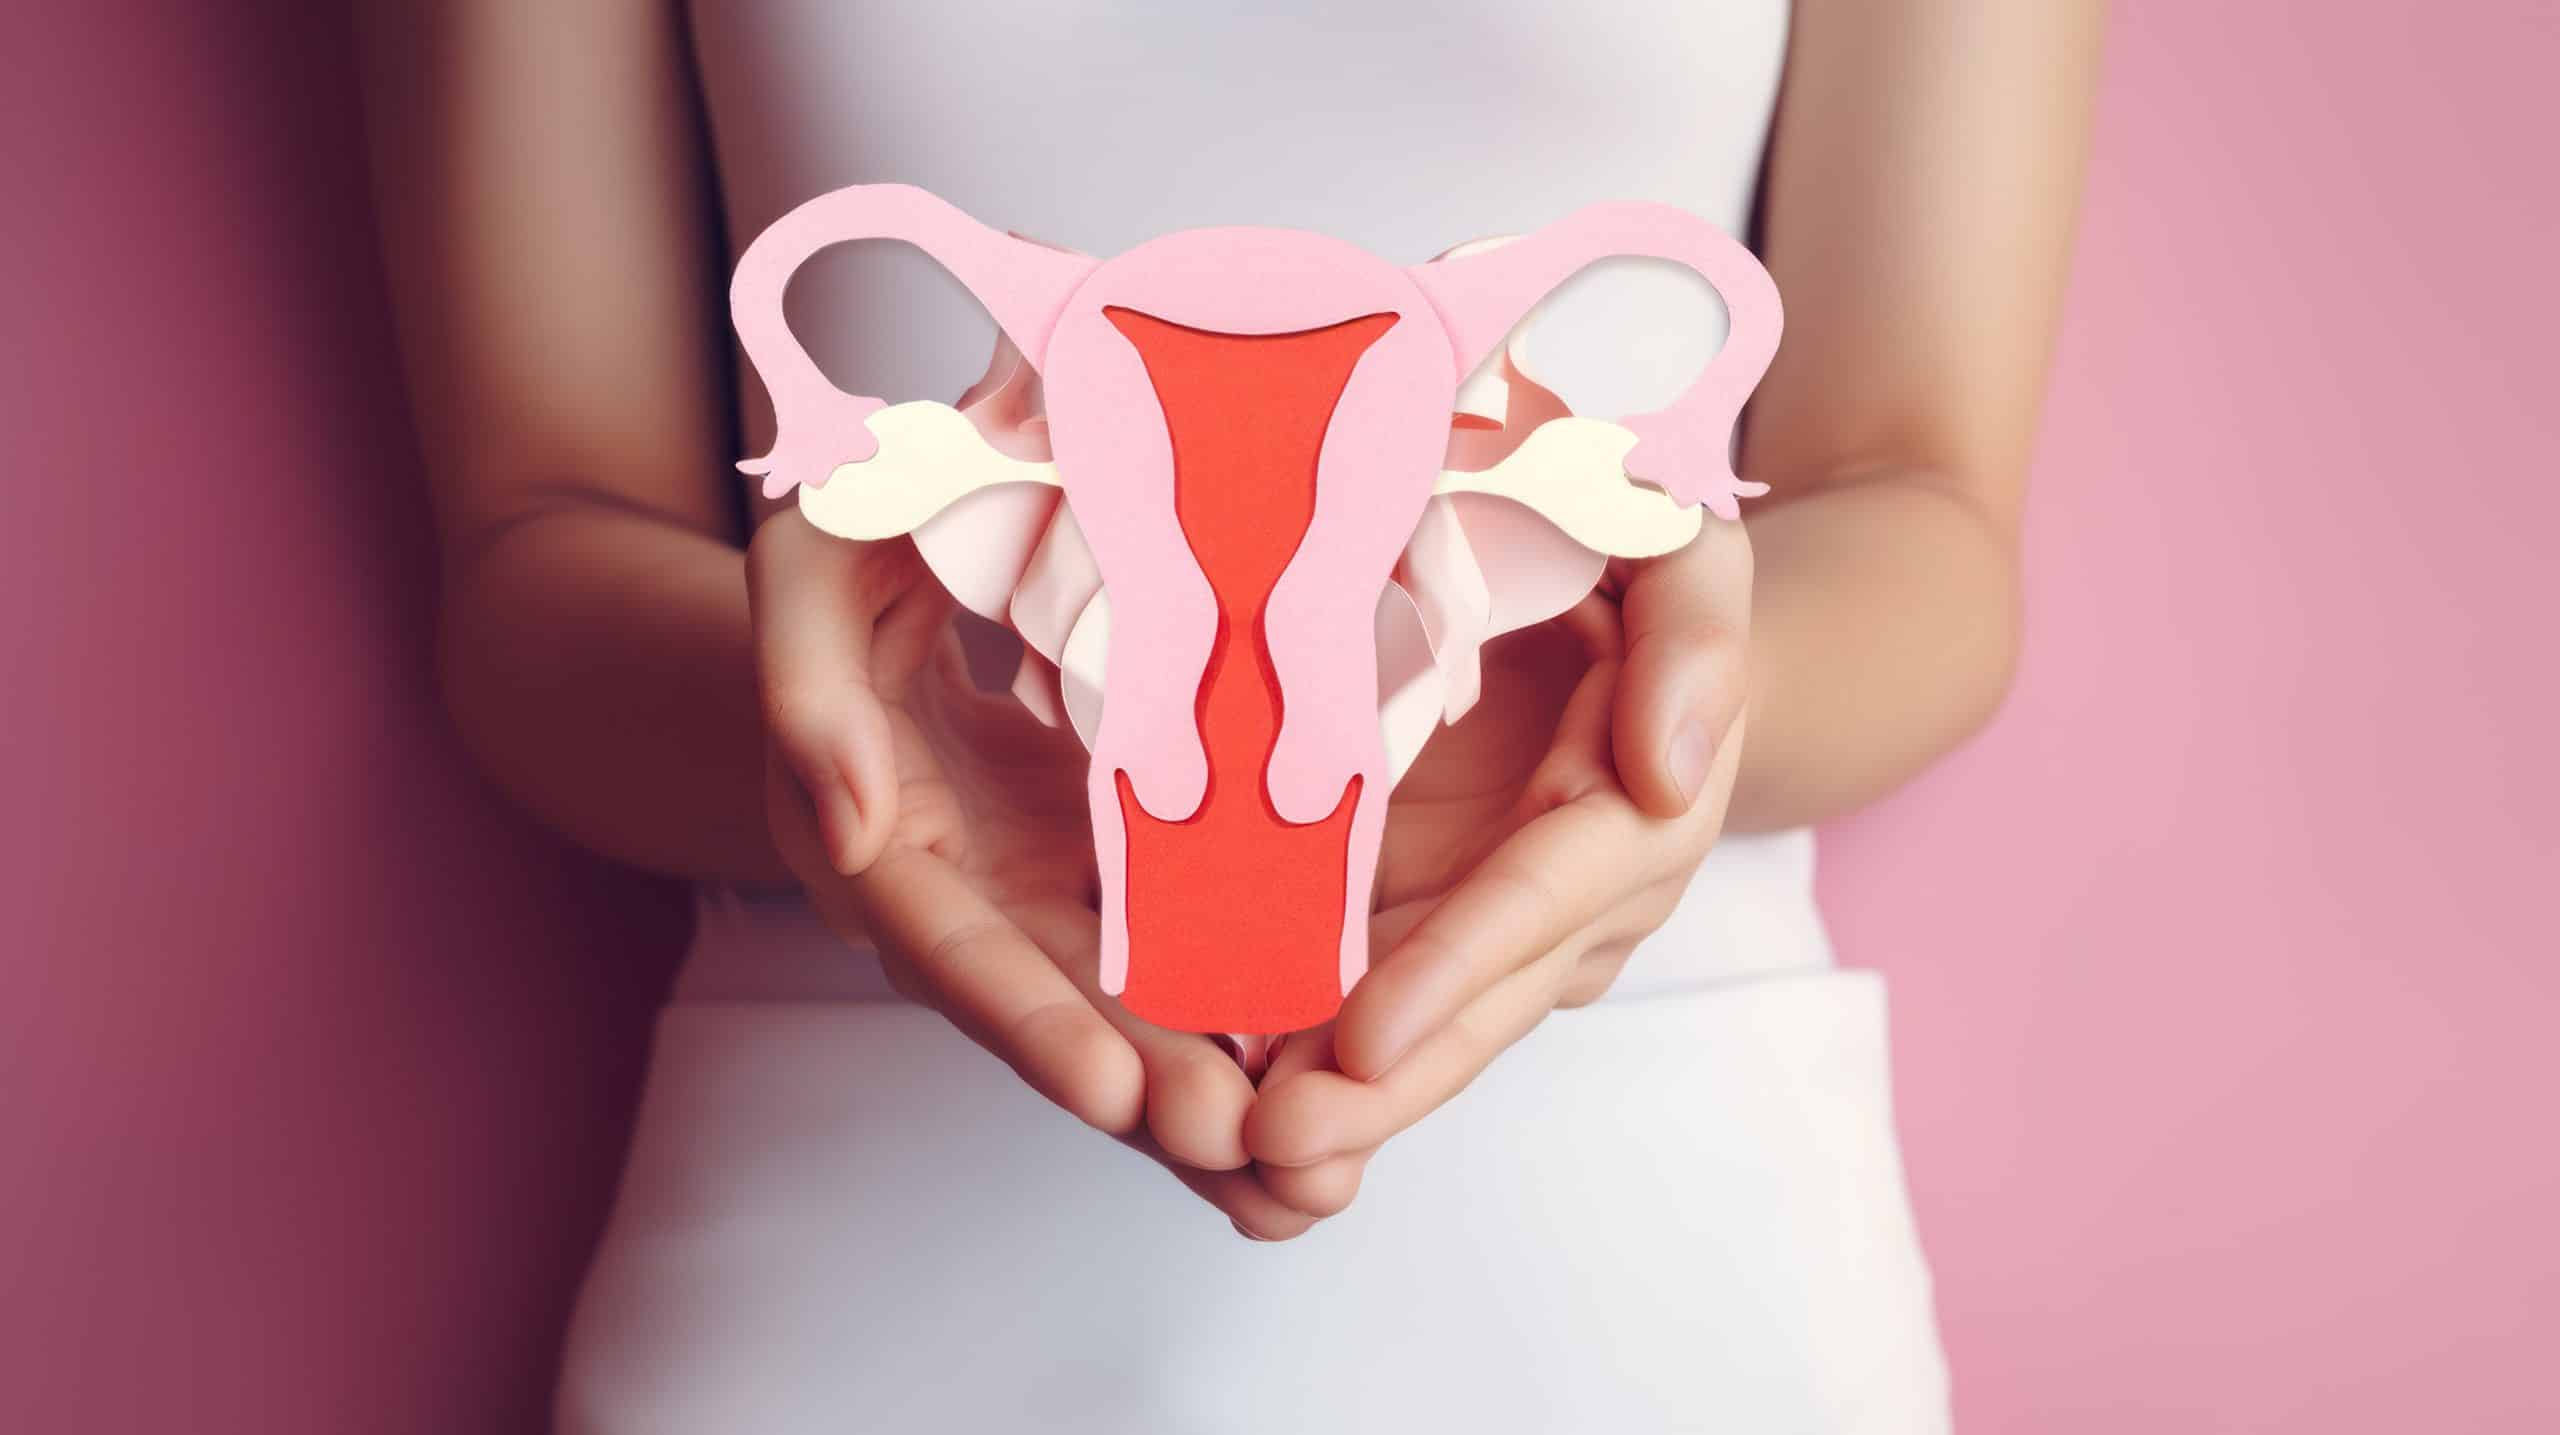 What Causes Polycystic Ovarian Syndrome